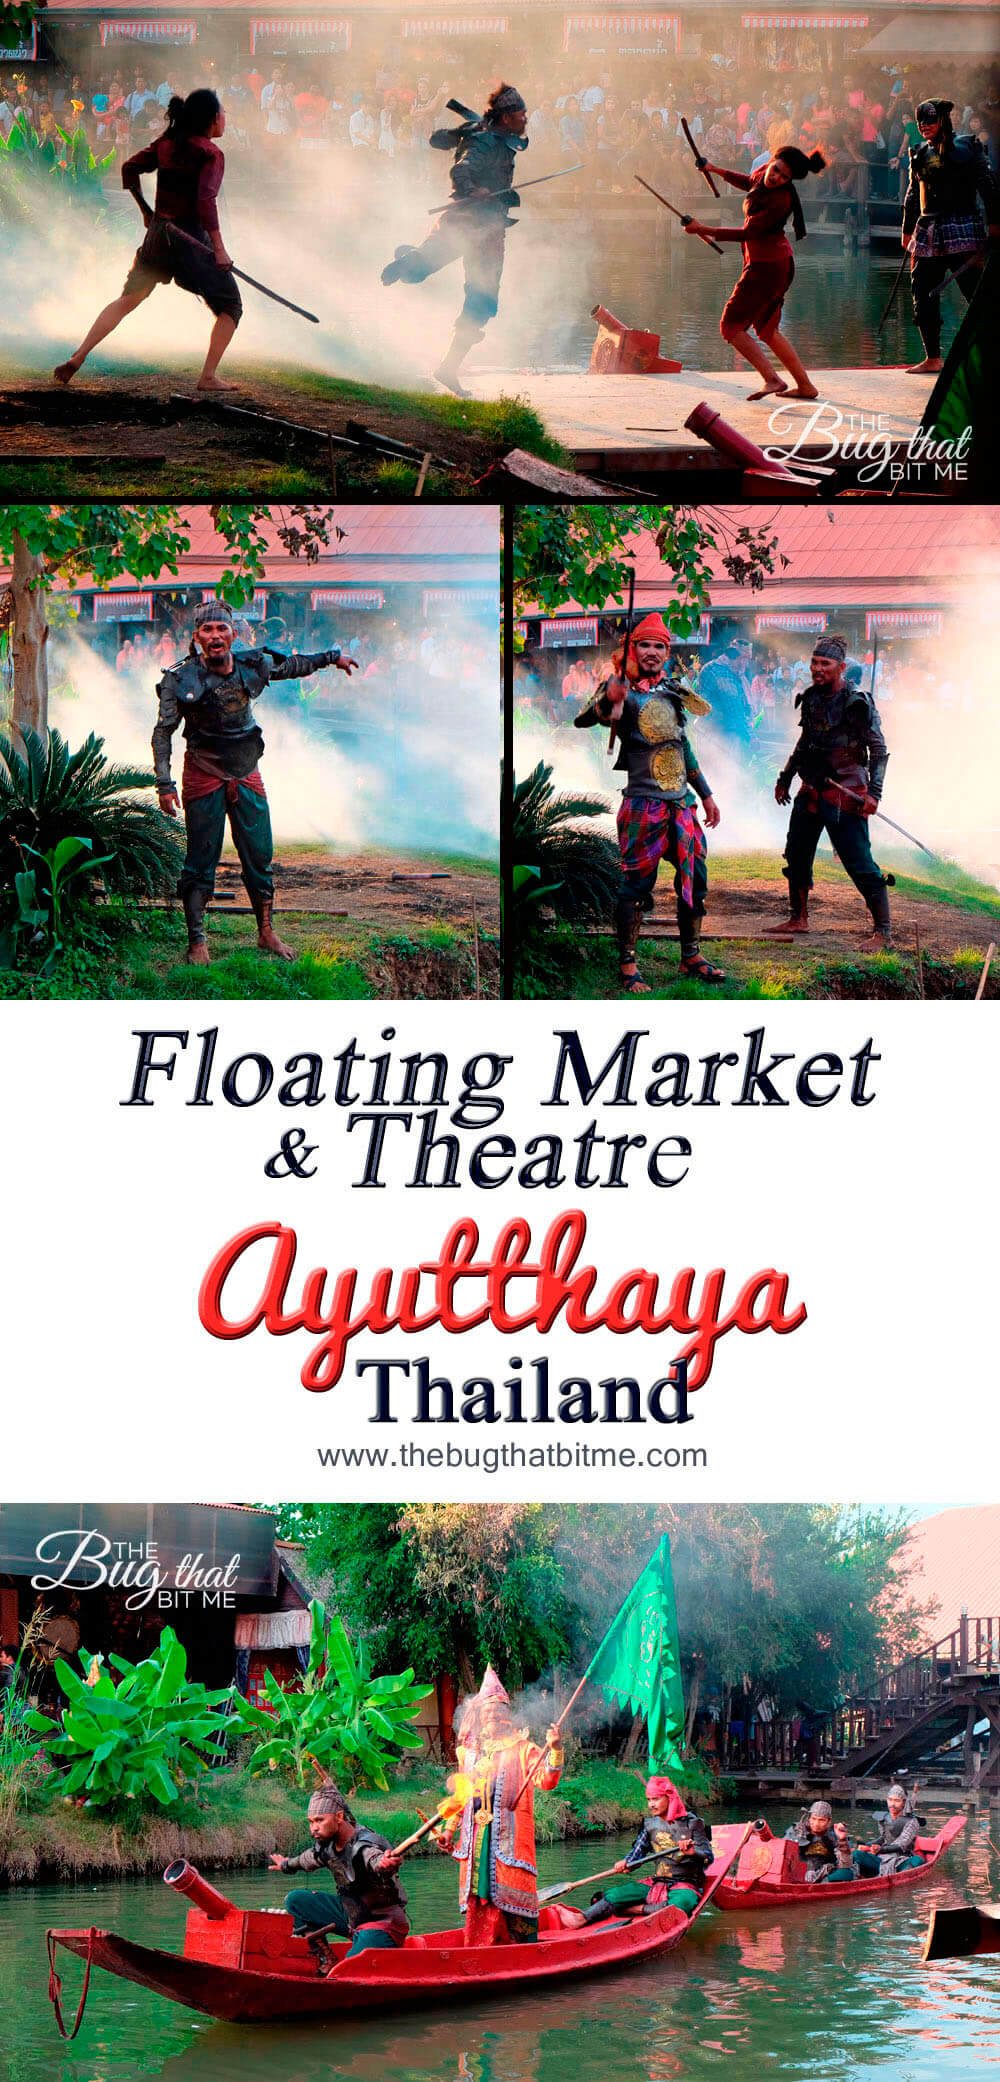 Floating Market & Theatre in Ayutthaya, Thailand | The Bug That Bit Me